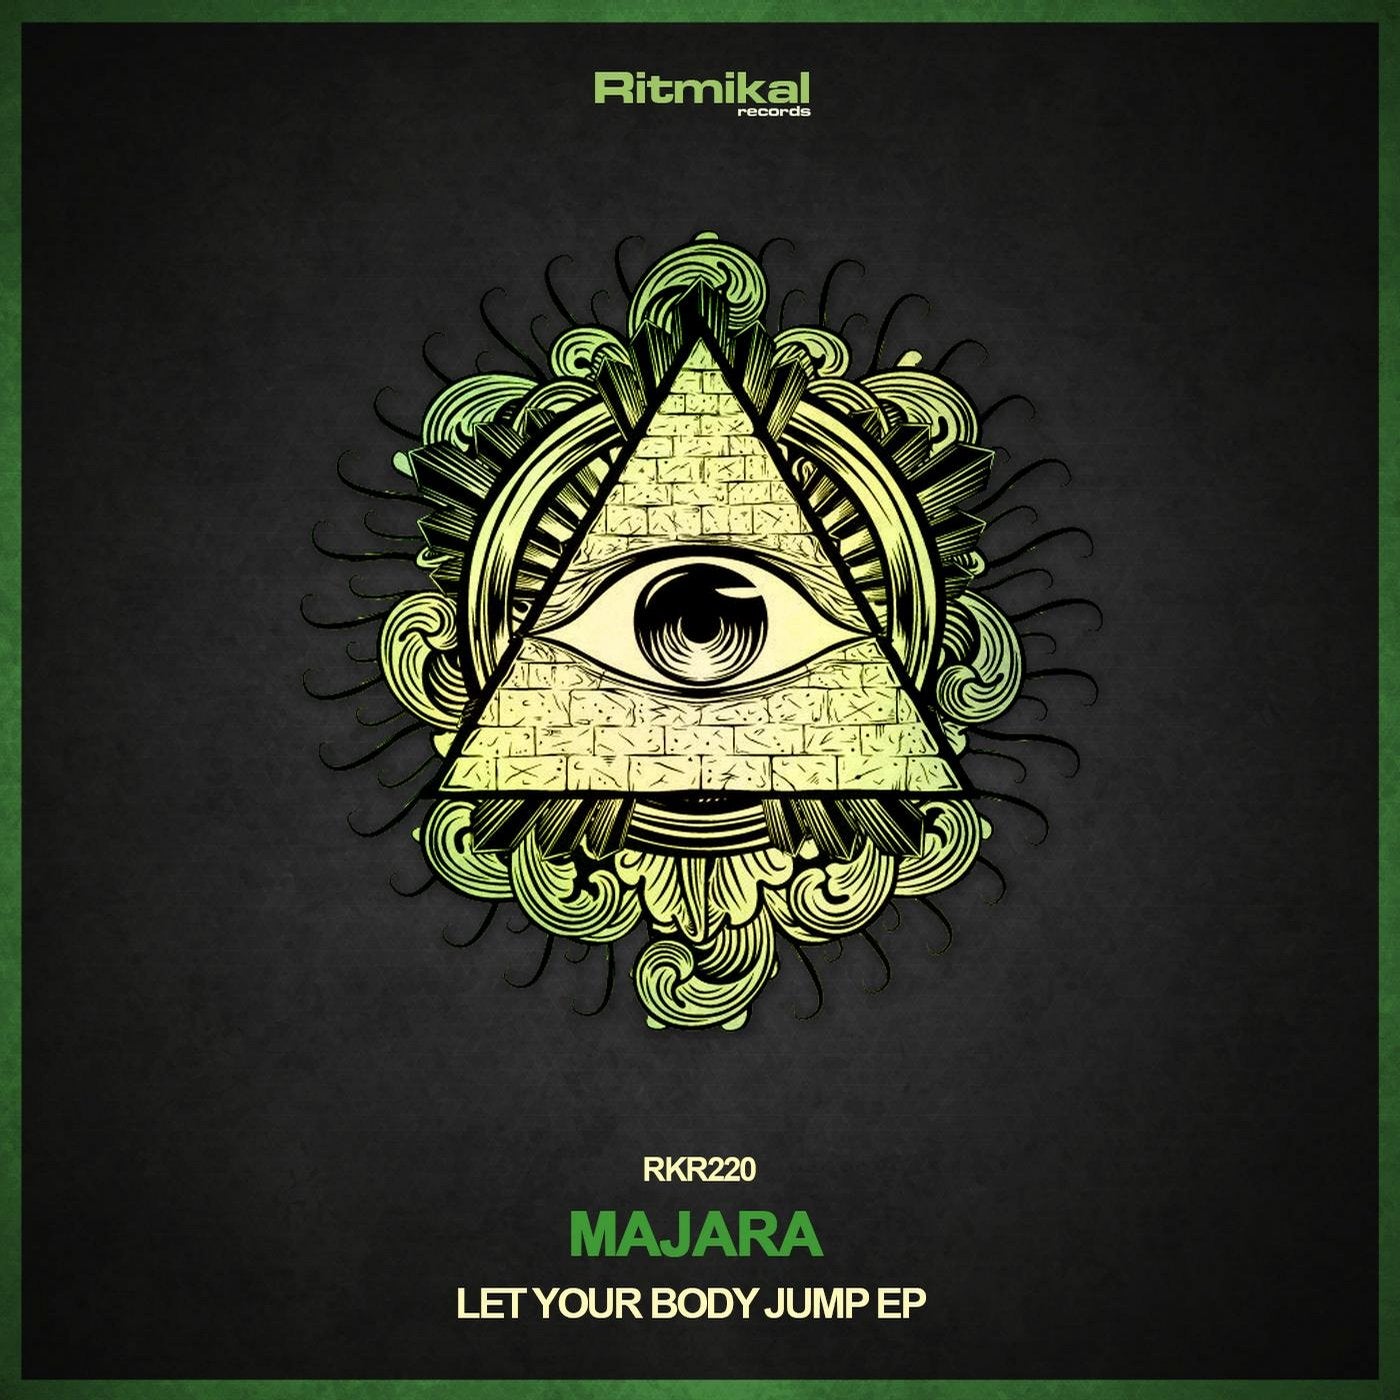 Let Your Body Jump EP